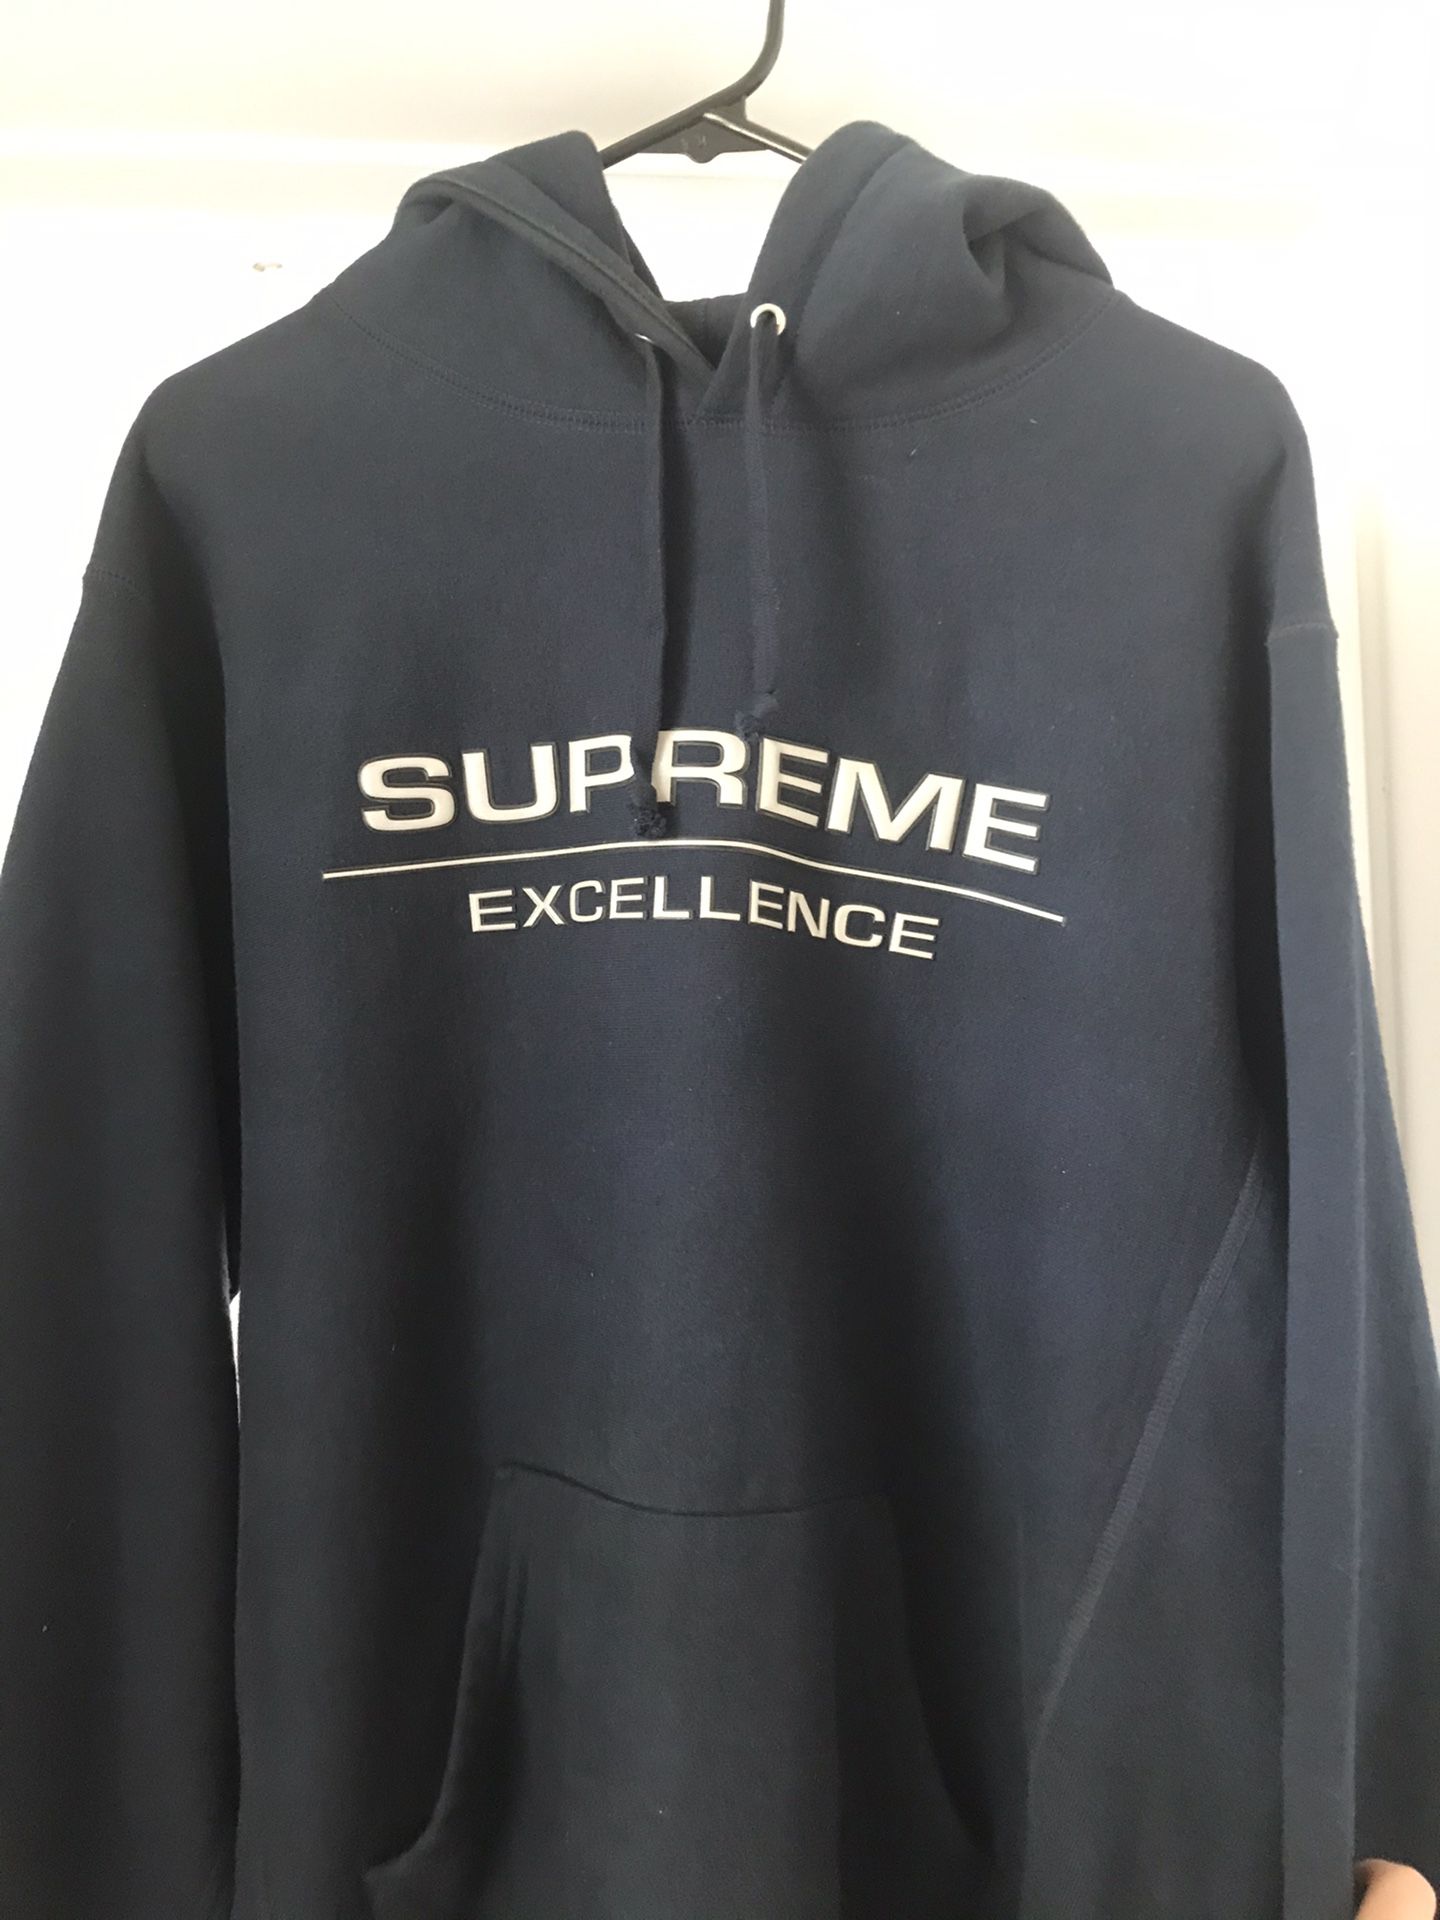 SUPREME EXCELLENCE NAVY REFLECTIVE F/W 17